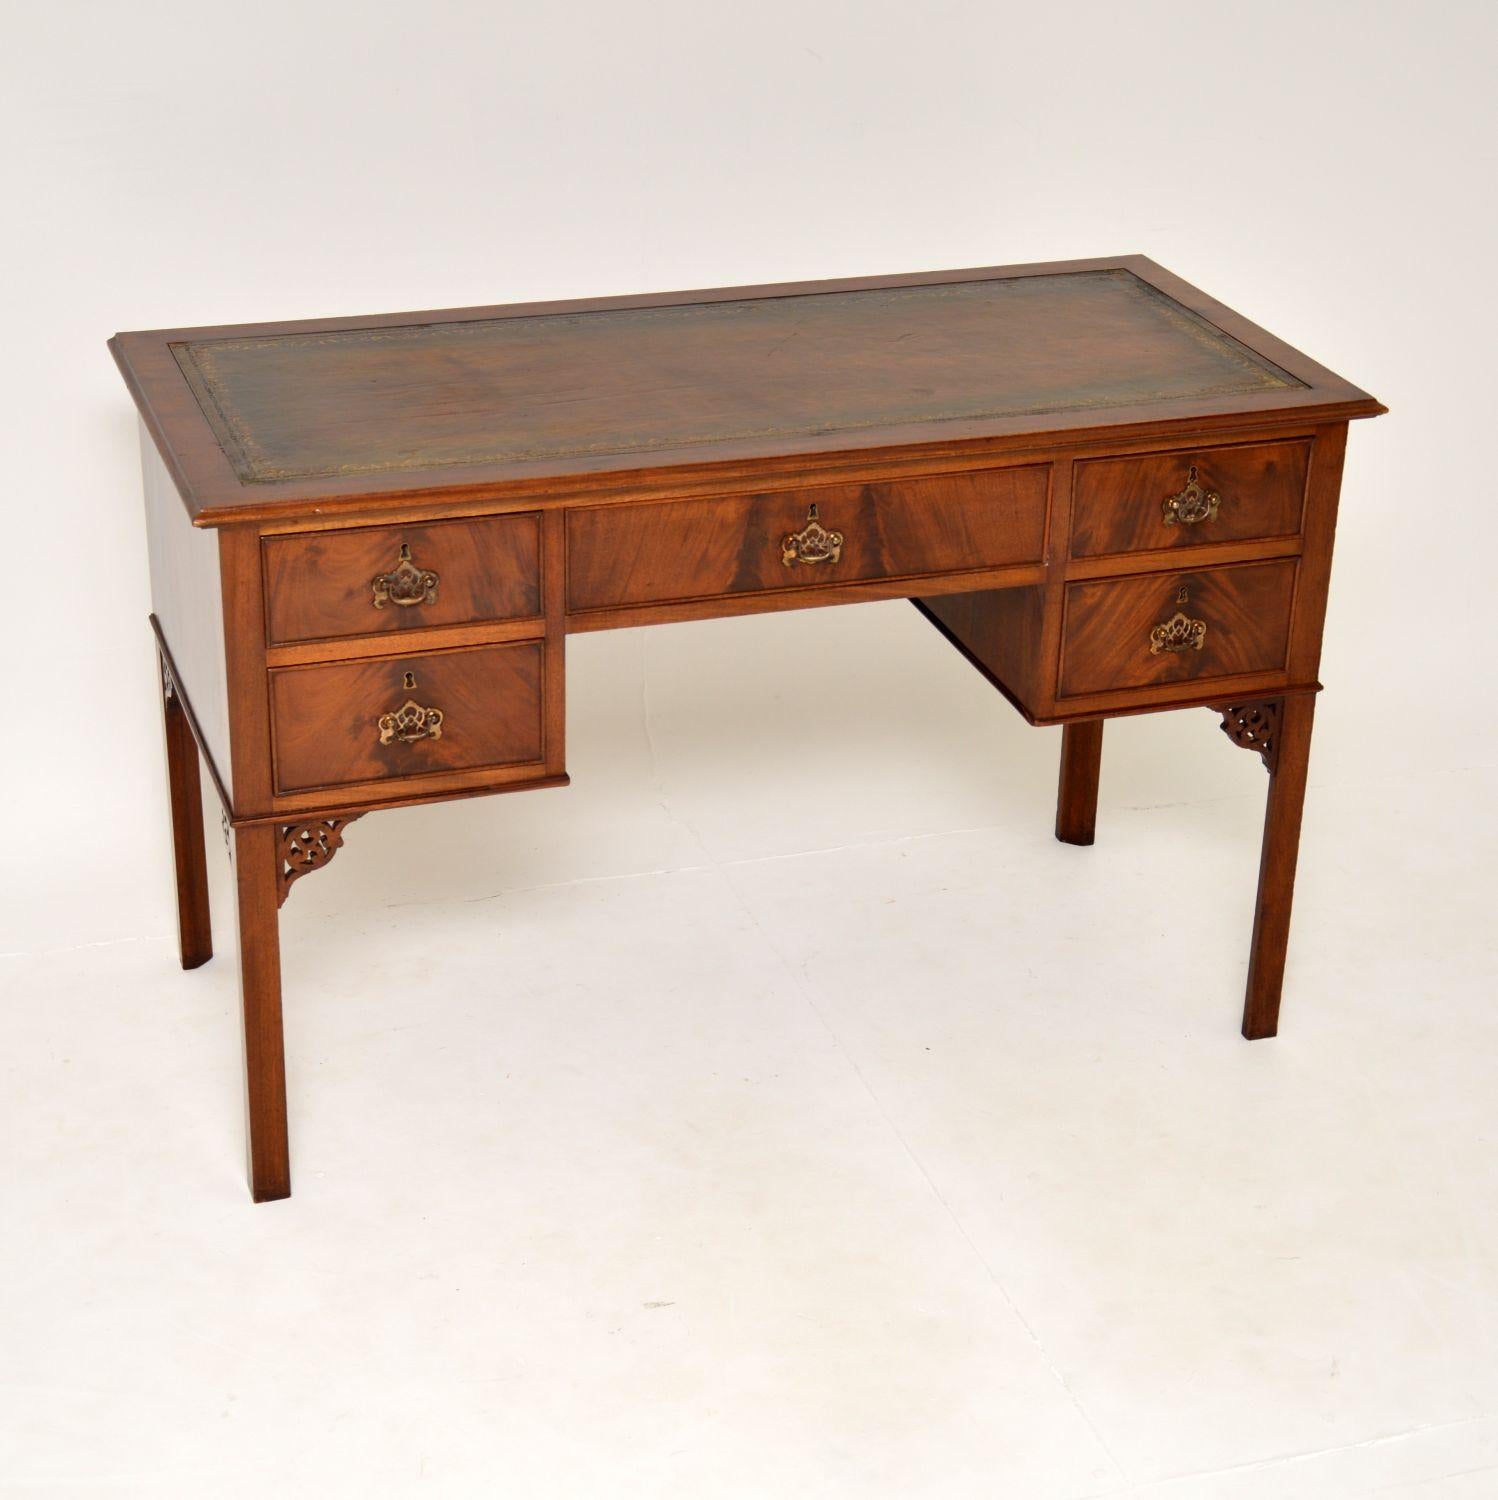 A very smart and practical antique Chippendale style desk, made in England & dating from around the 1900-1920 period.

The quality is excellent and this is a very useful size. The wood has beautiful grain patterns, a lovely colour and gorgeous